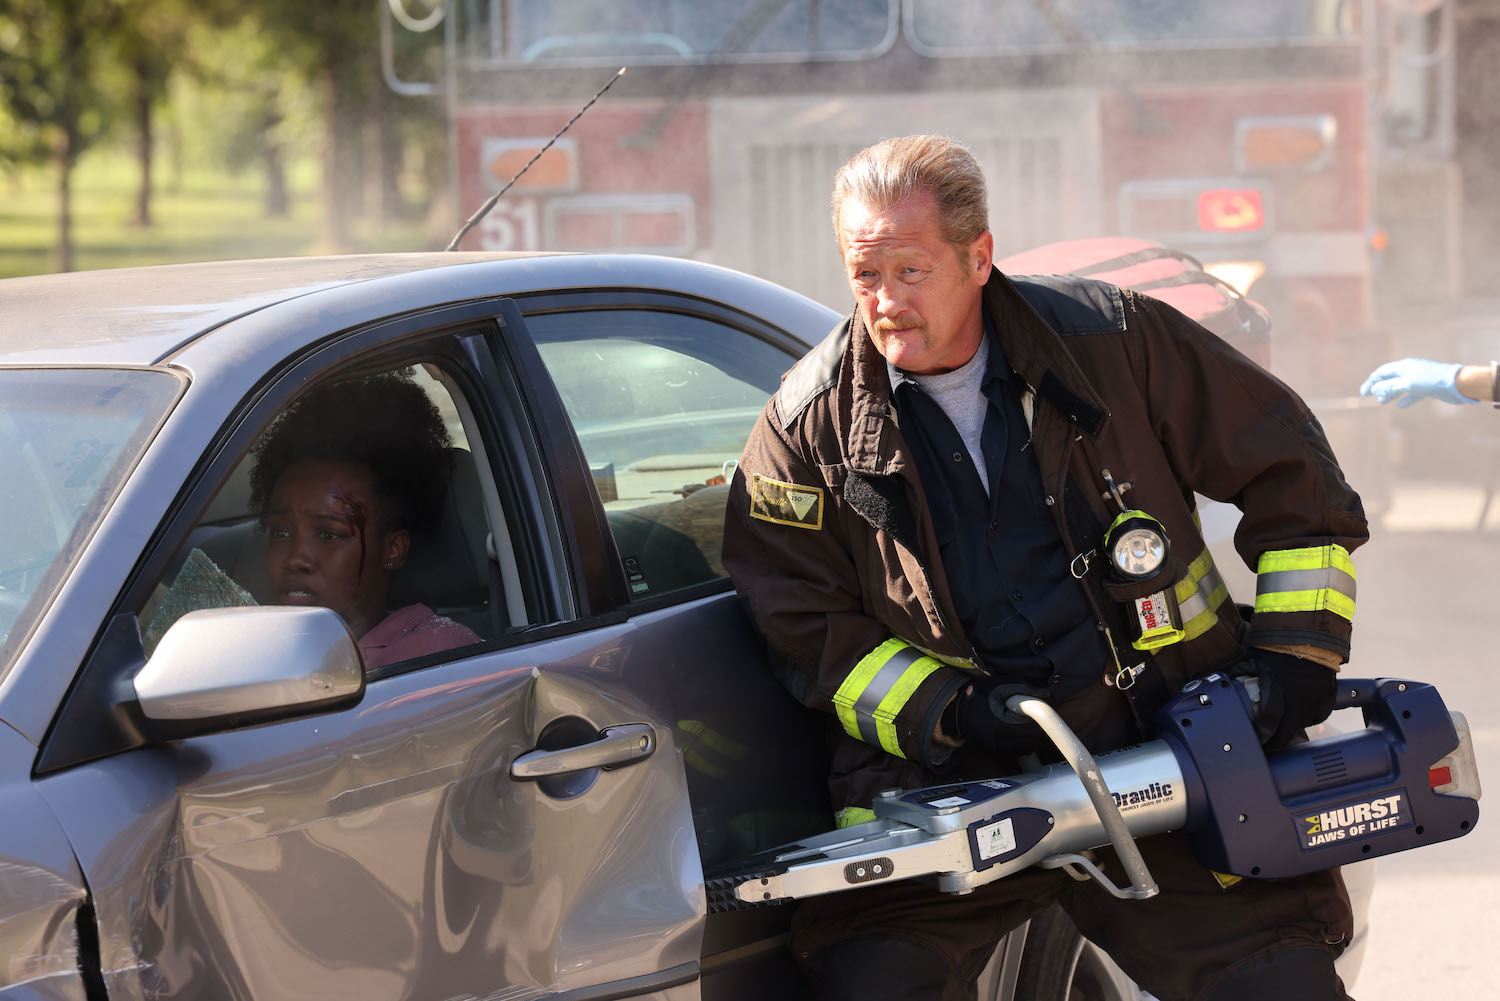 Mouch leaning against a car in 'Chicago Fire' Season 11